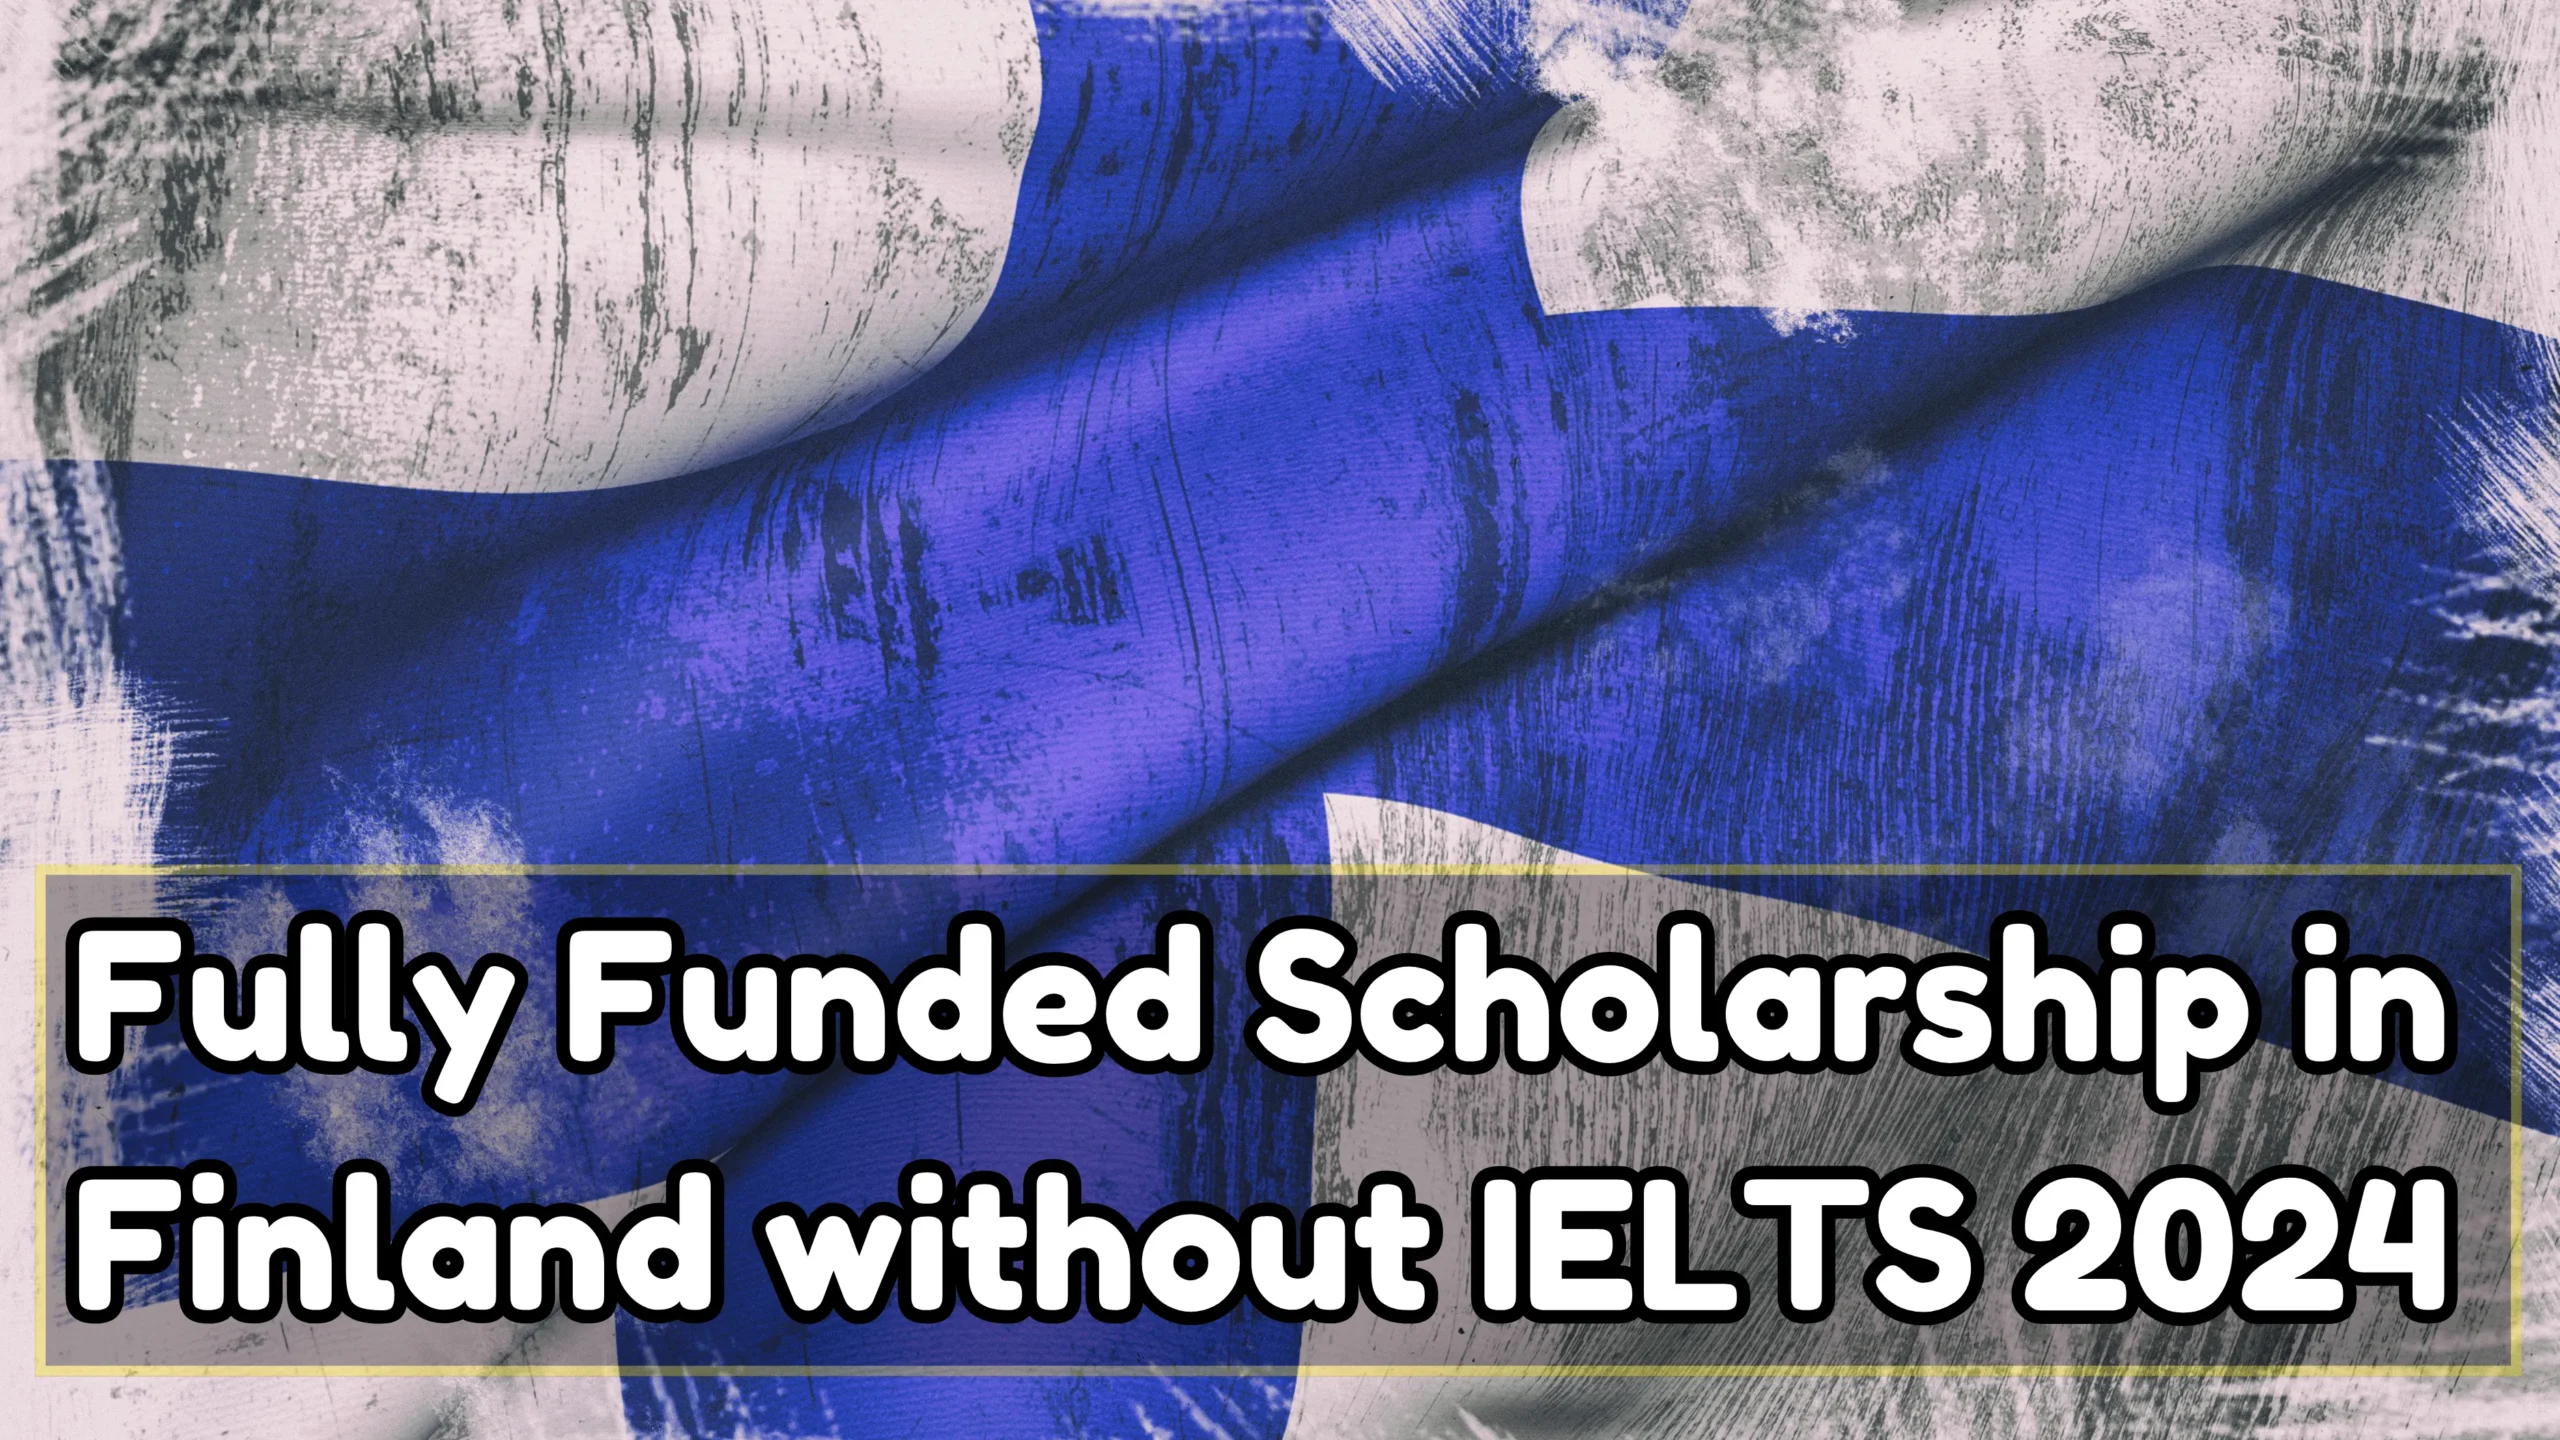 Fully Funded Scholarship in Finland without IELTS 2024 - Study in Finland